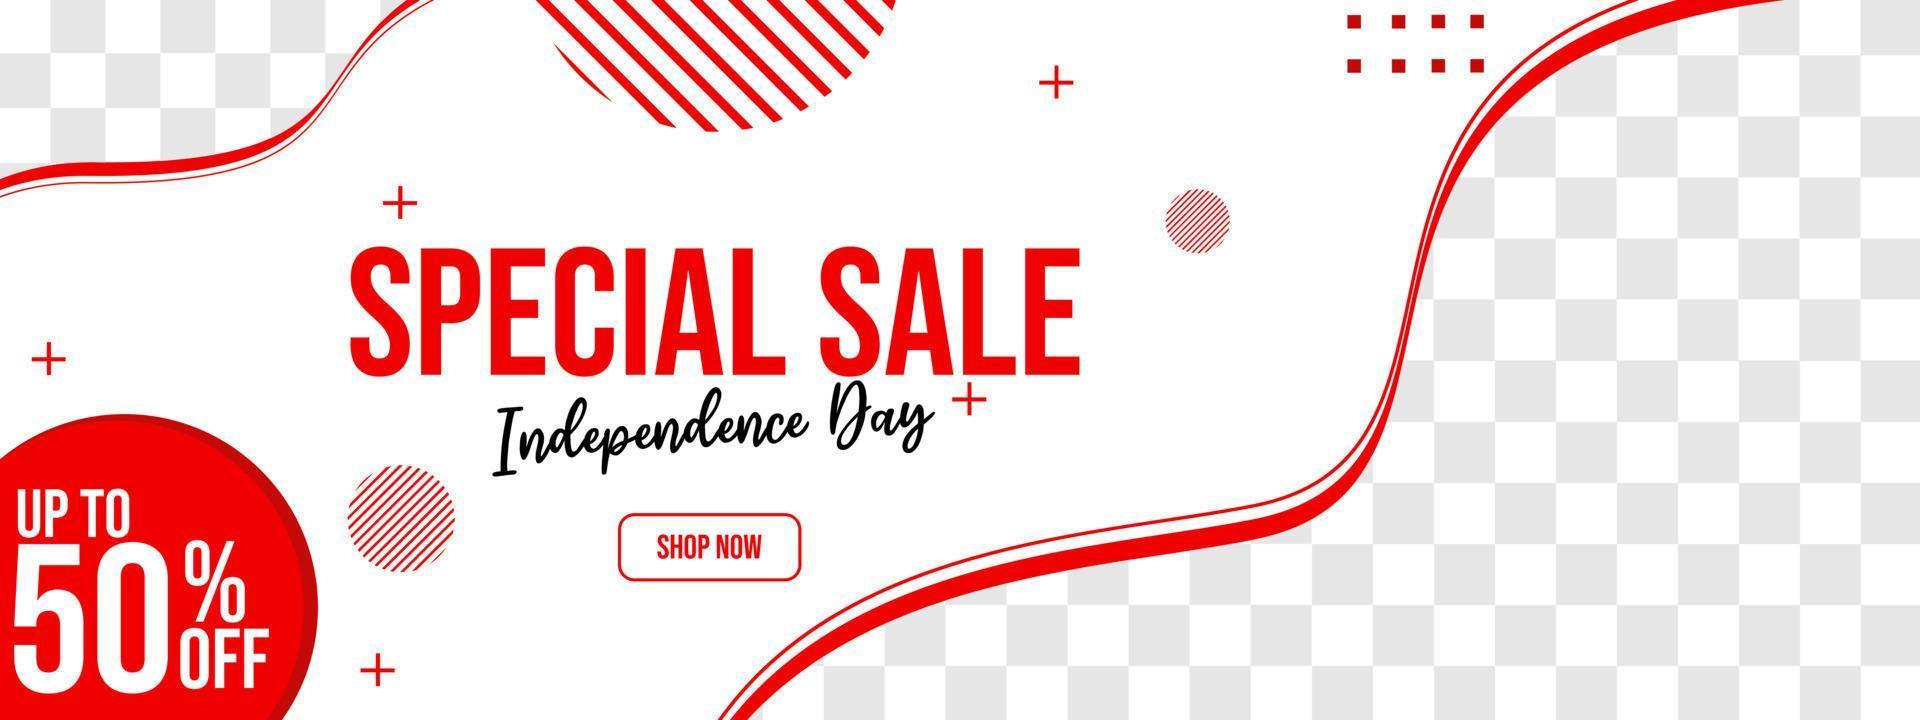 independence day special discount advertising banner. red and white background. social media cover vector